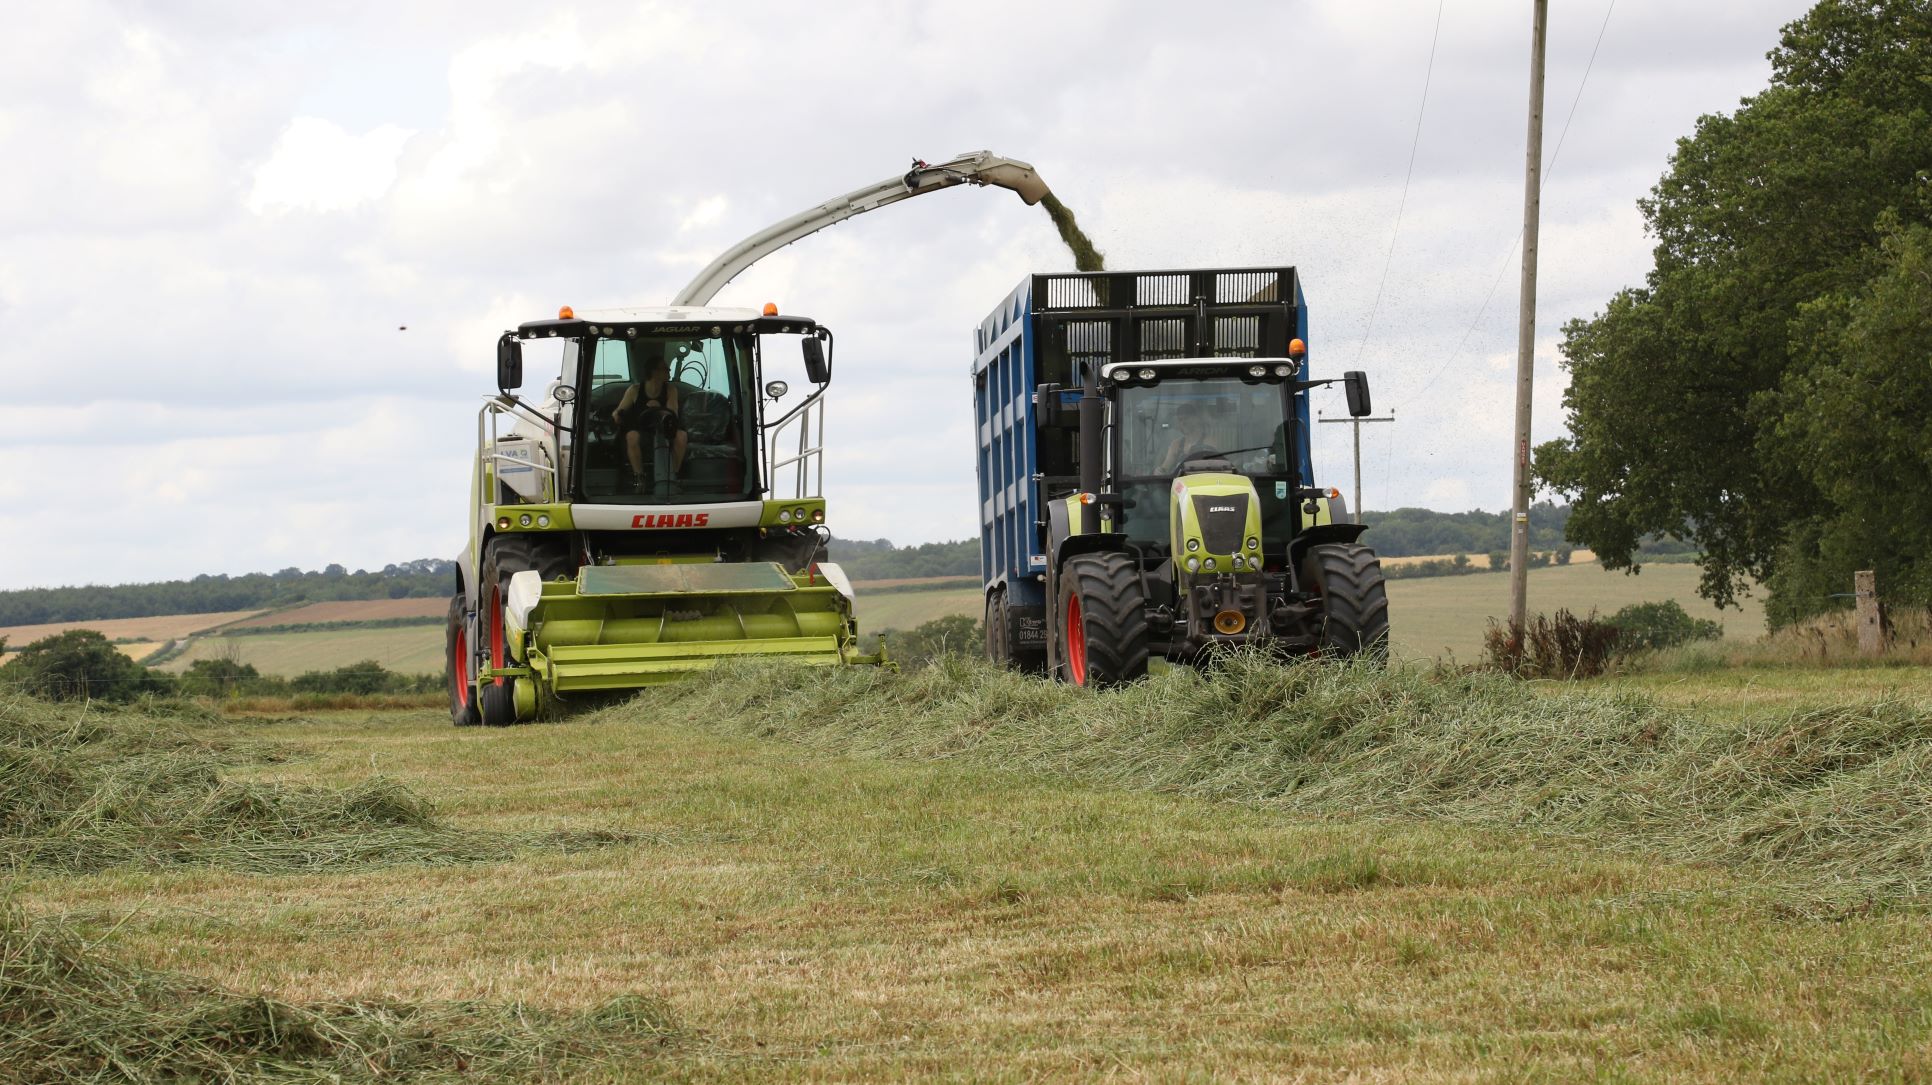 Silage being cut with forage harvester